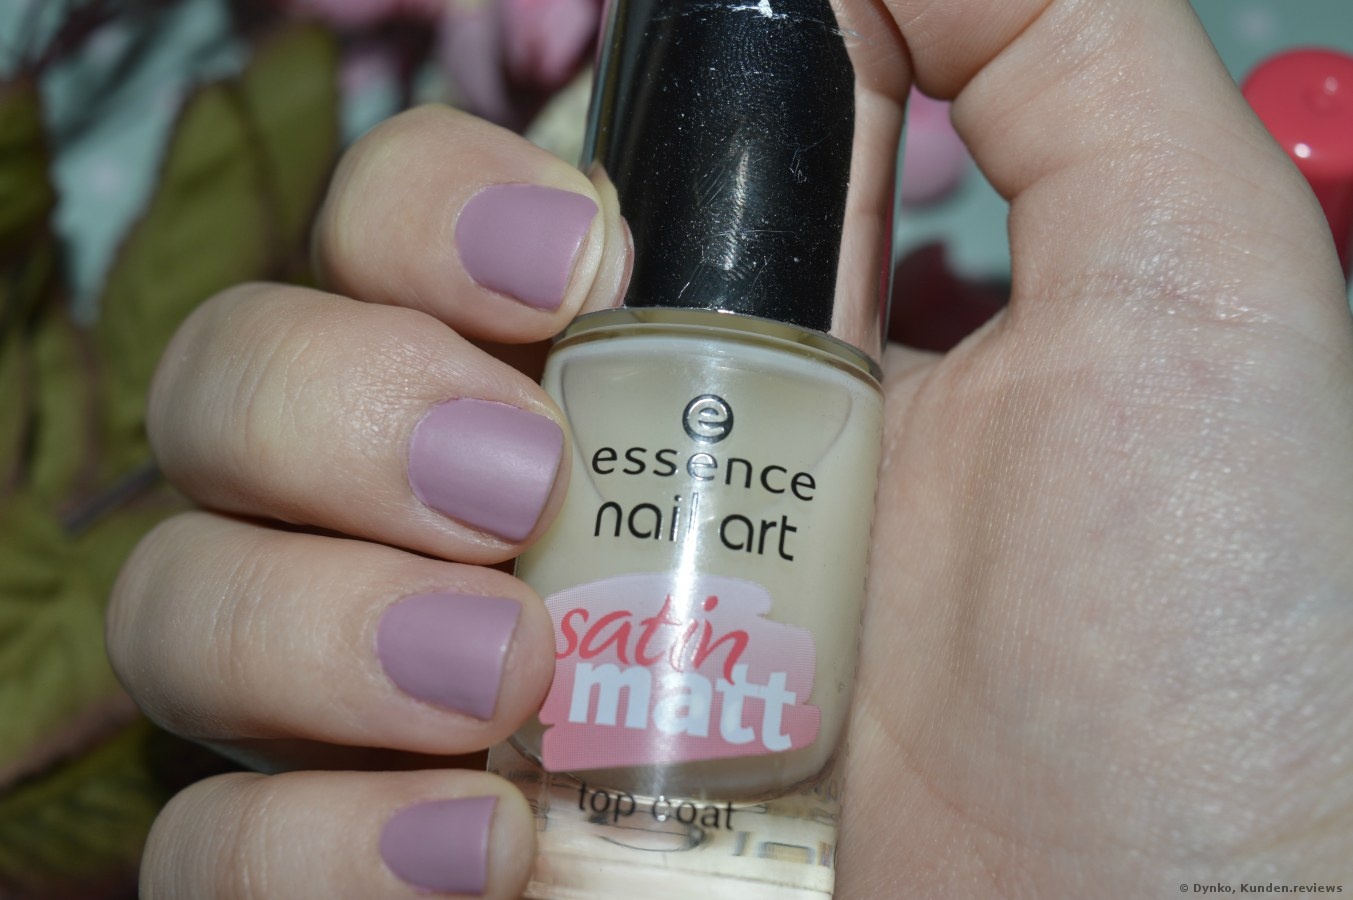 Catrice Ultimate Nail Lacquer Nagellack Foto